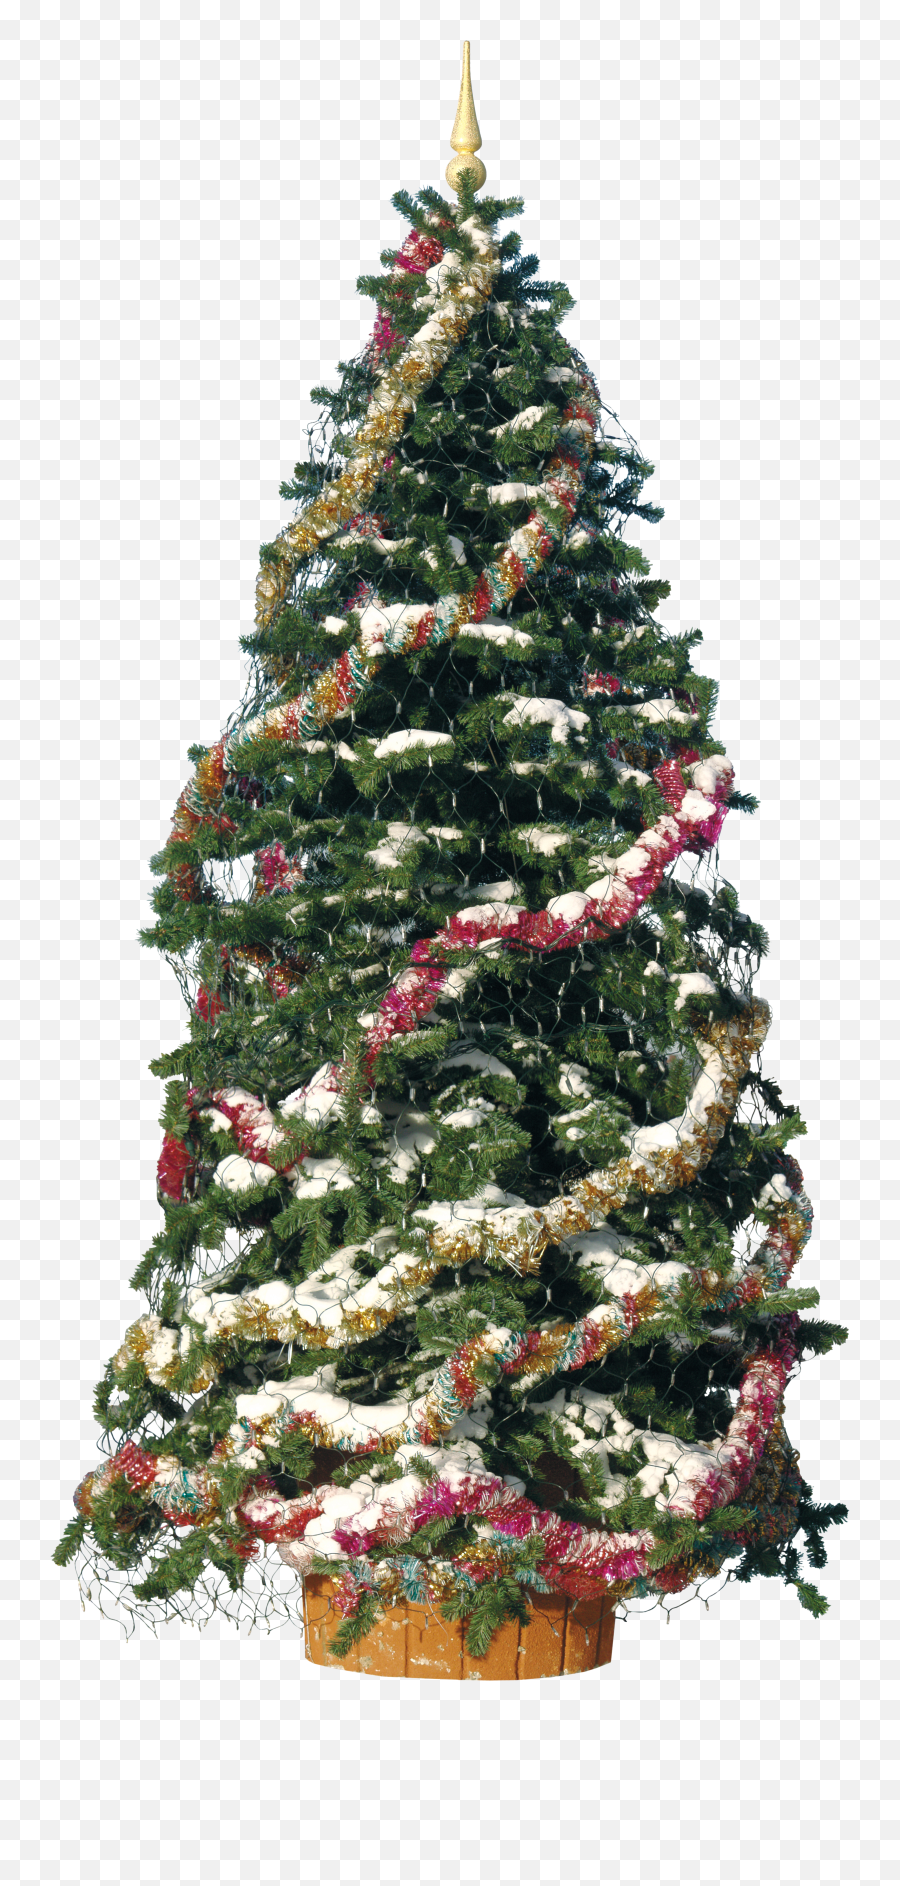 Download Christmas Tree With Decoration Png Image For Free